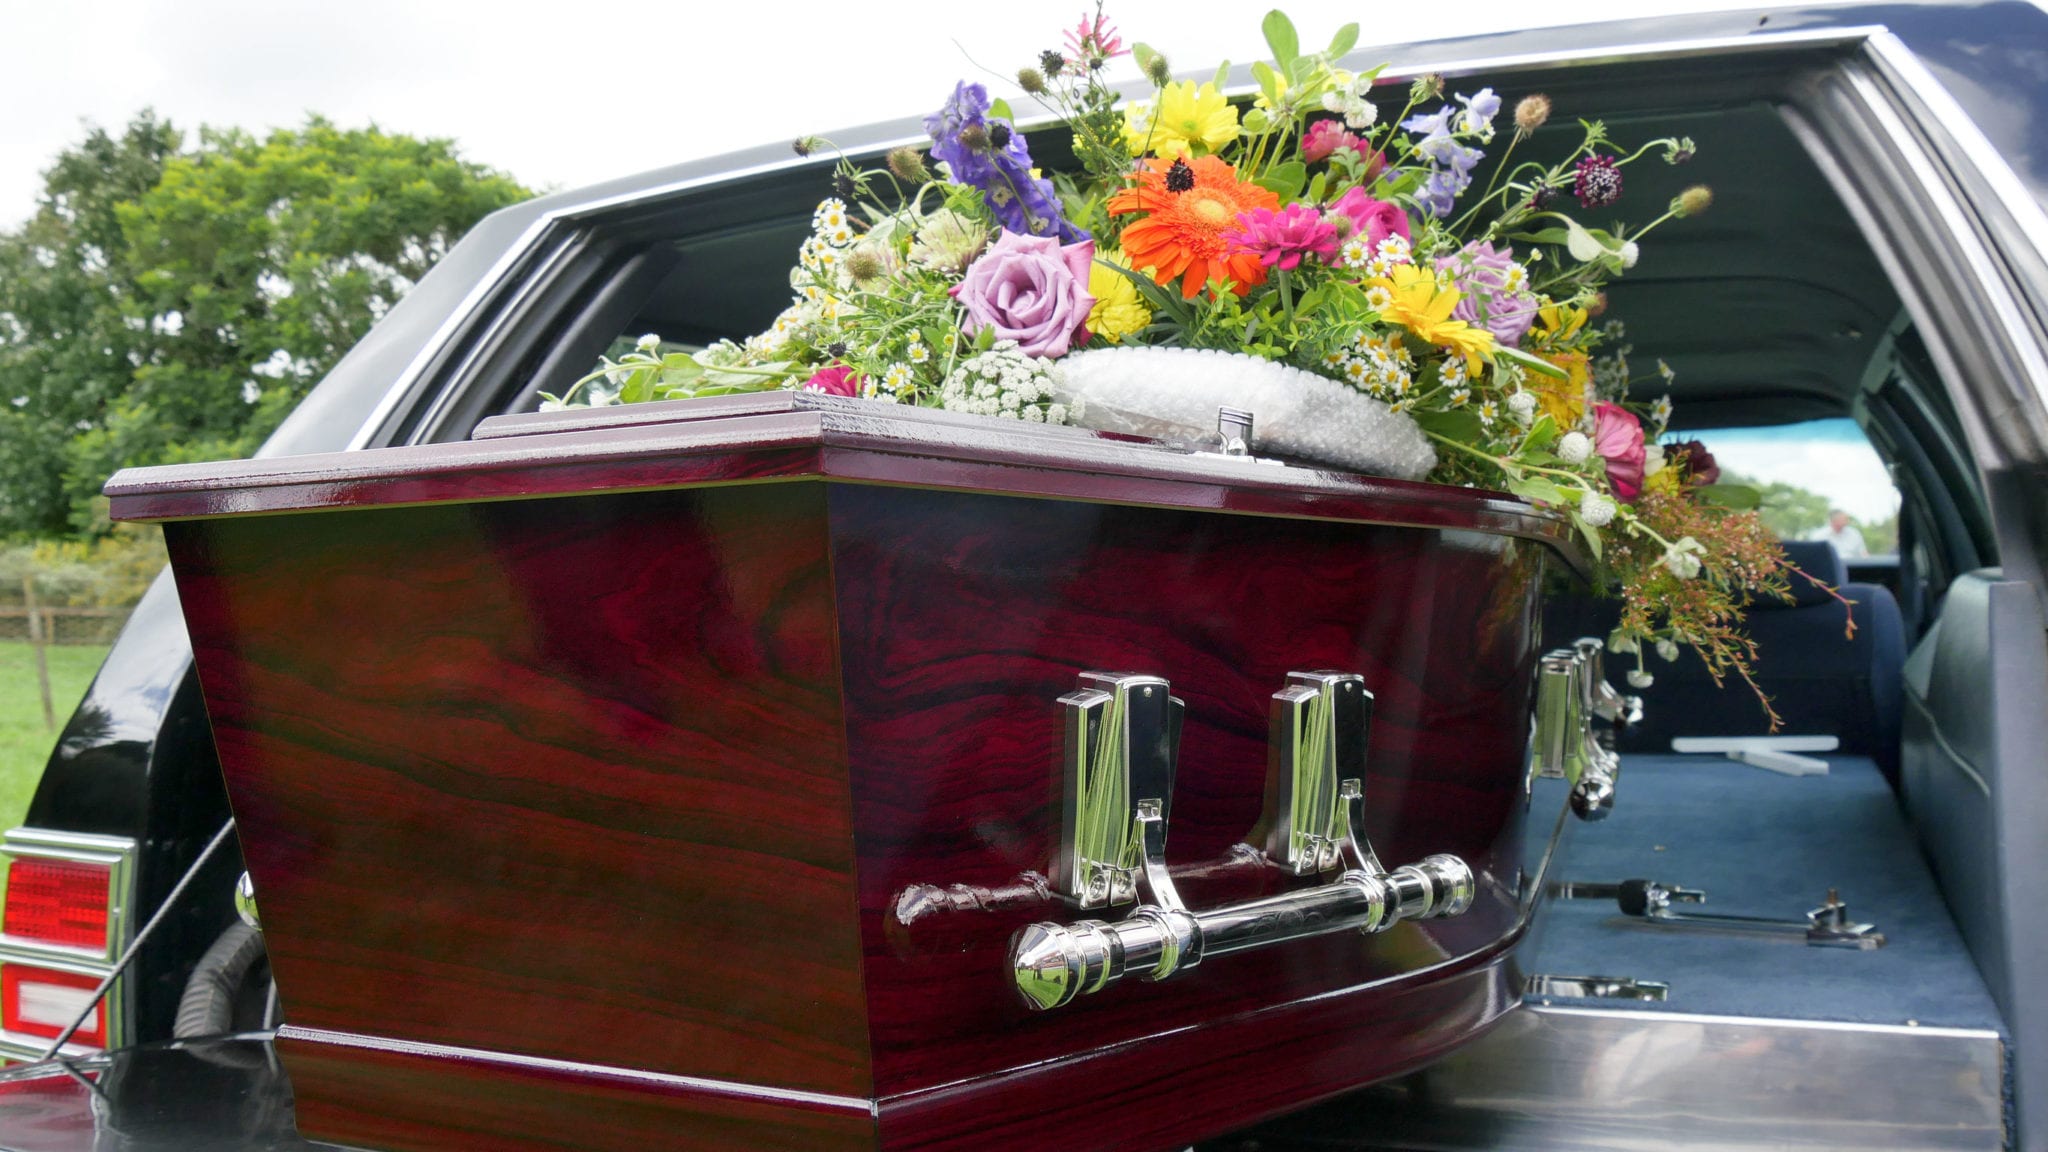 Florida Wrongful Death Claims Subject to “Discovery Rule”